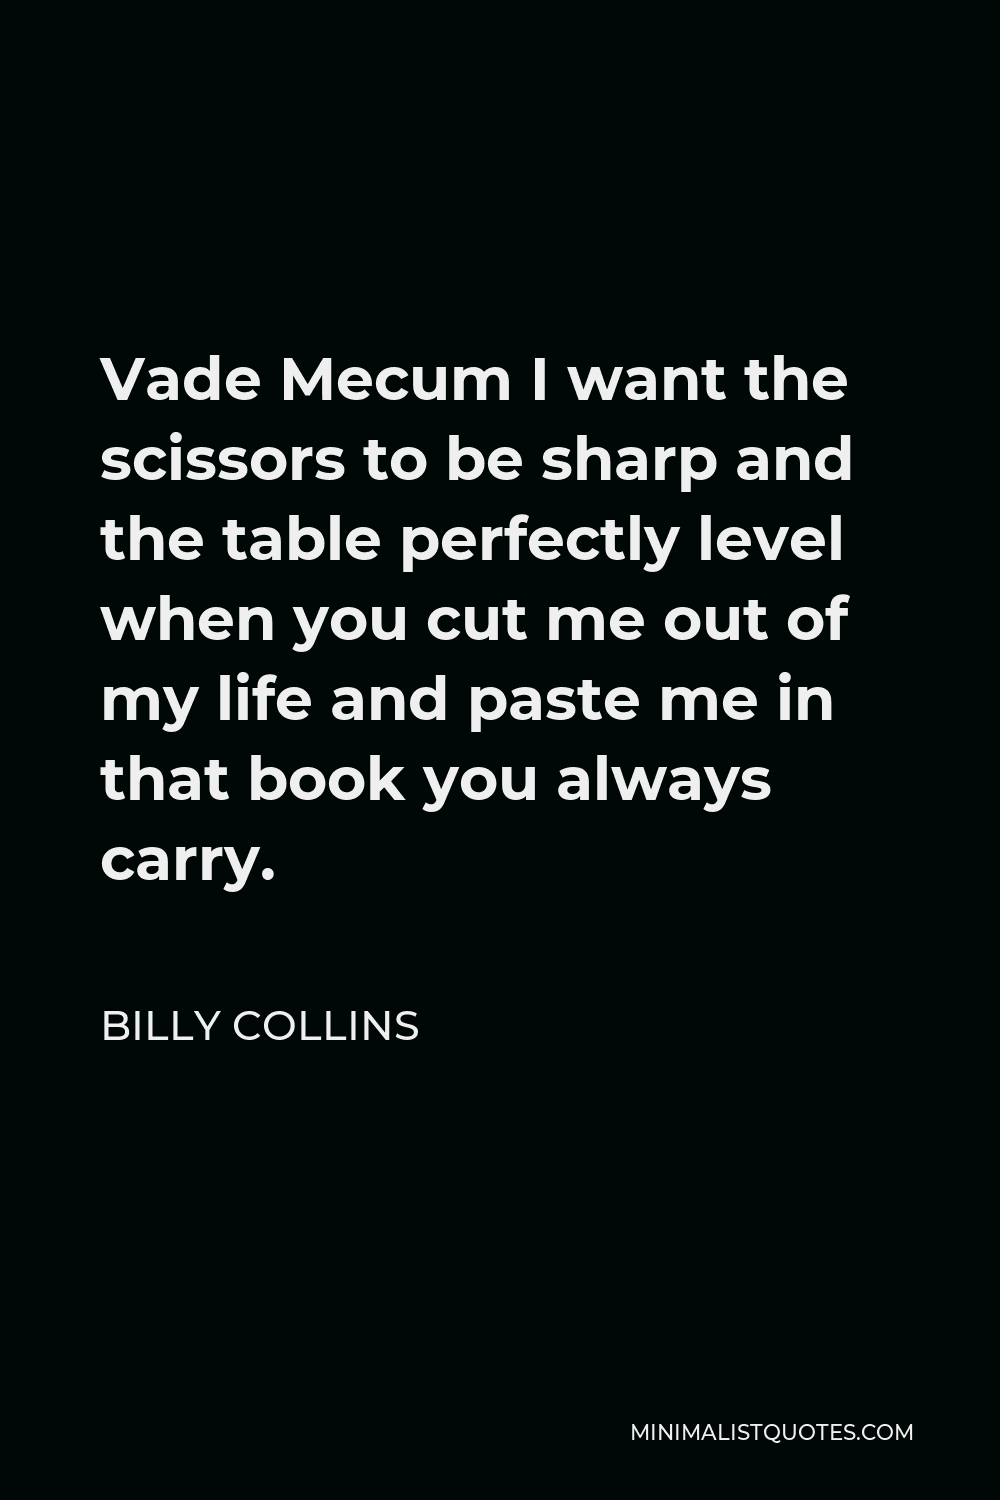 Billy Collins Quote - Vade Mecum I want the scissors to be sharp and the table perfectly level when you cut me out of my life and paste me in that book you always carry.